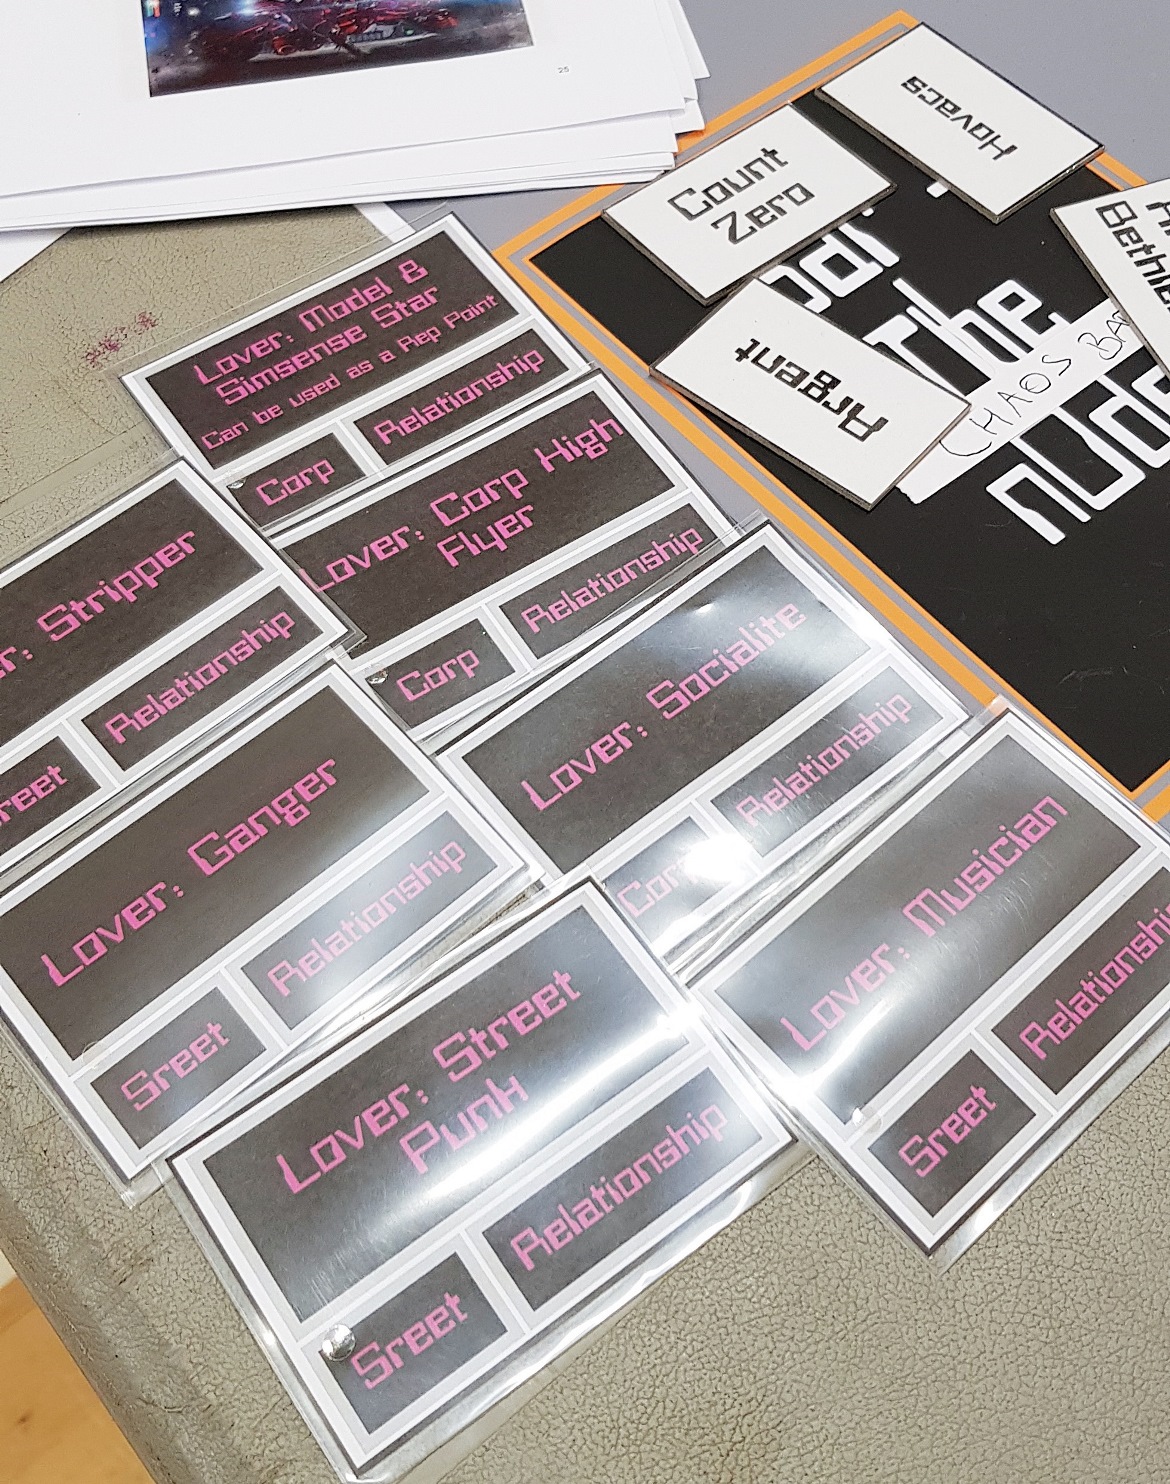 Seven lovers, one missing - Mirrorshades megagame after action report by BeckyBecky Blogs